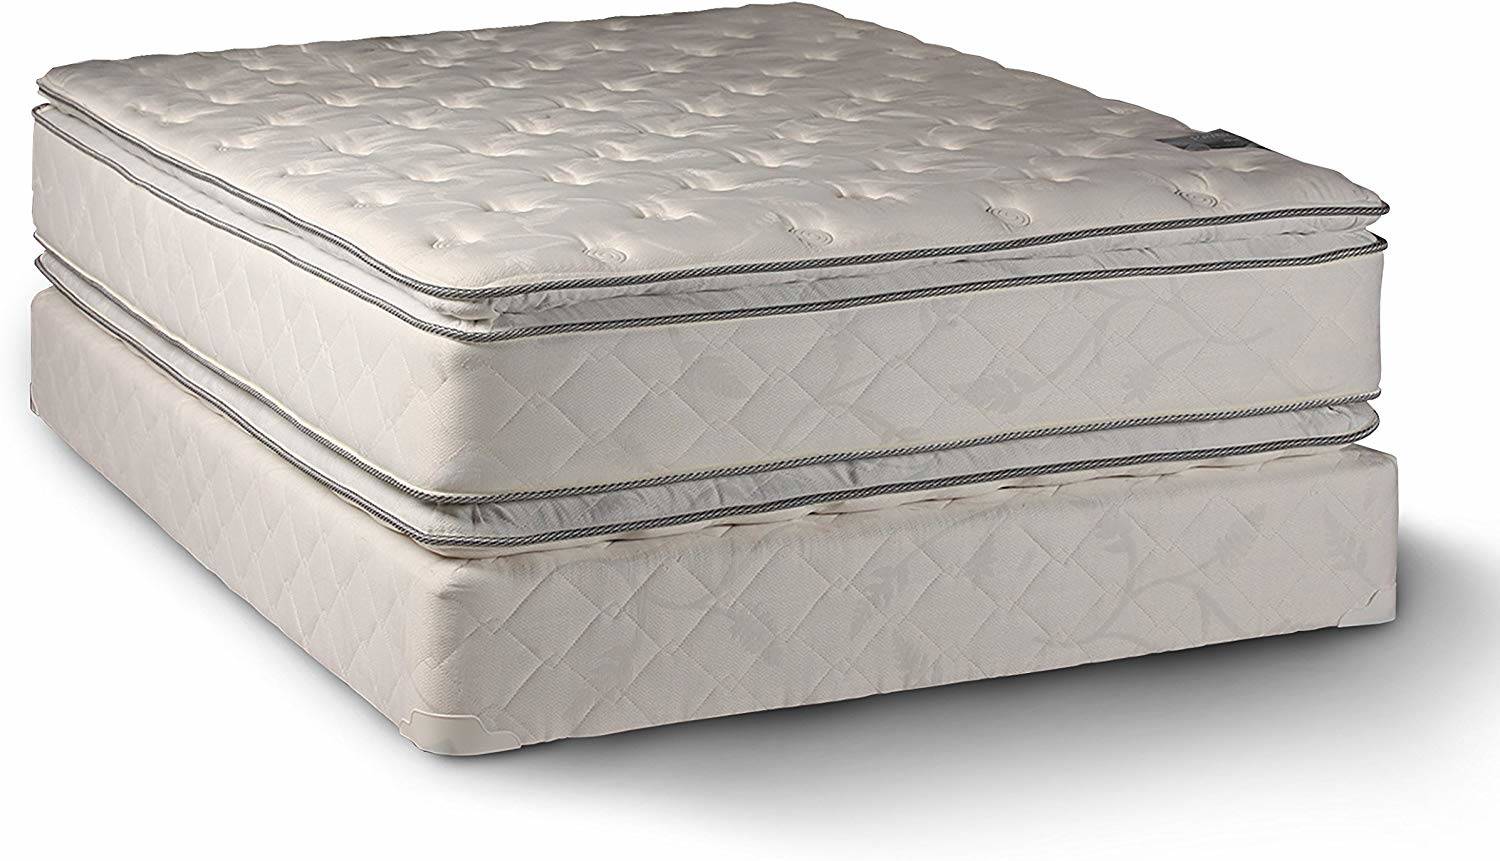 double sided pillowtop king size mattress